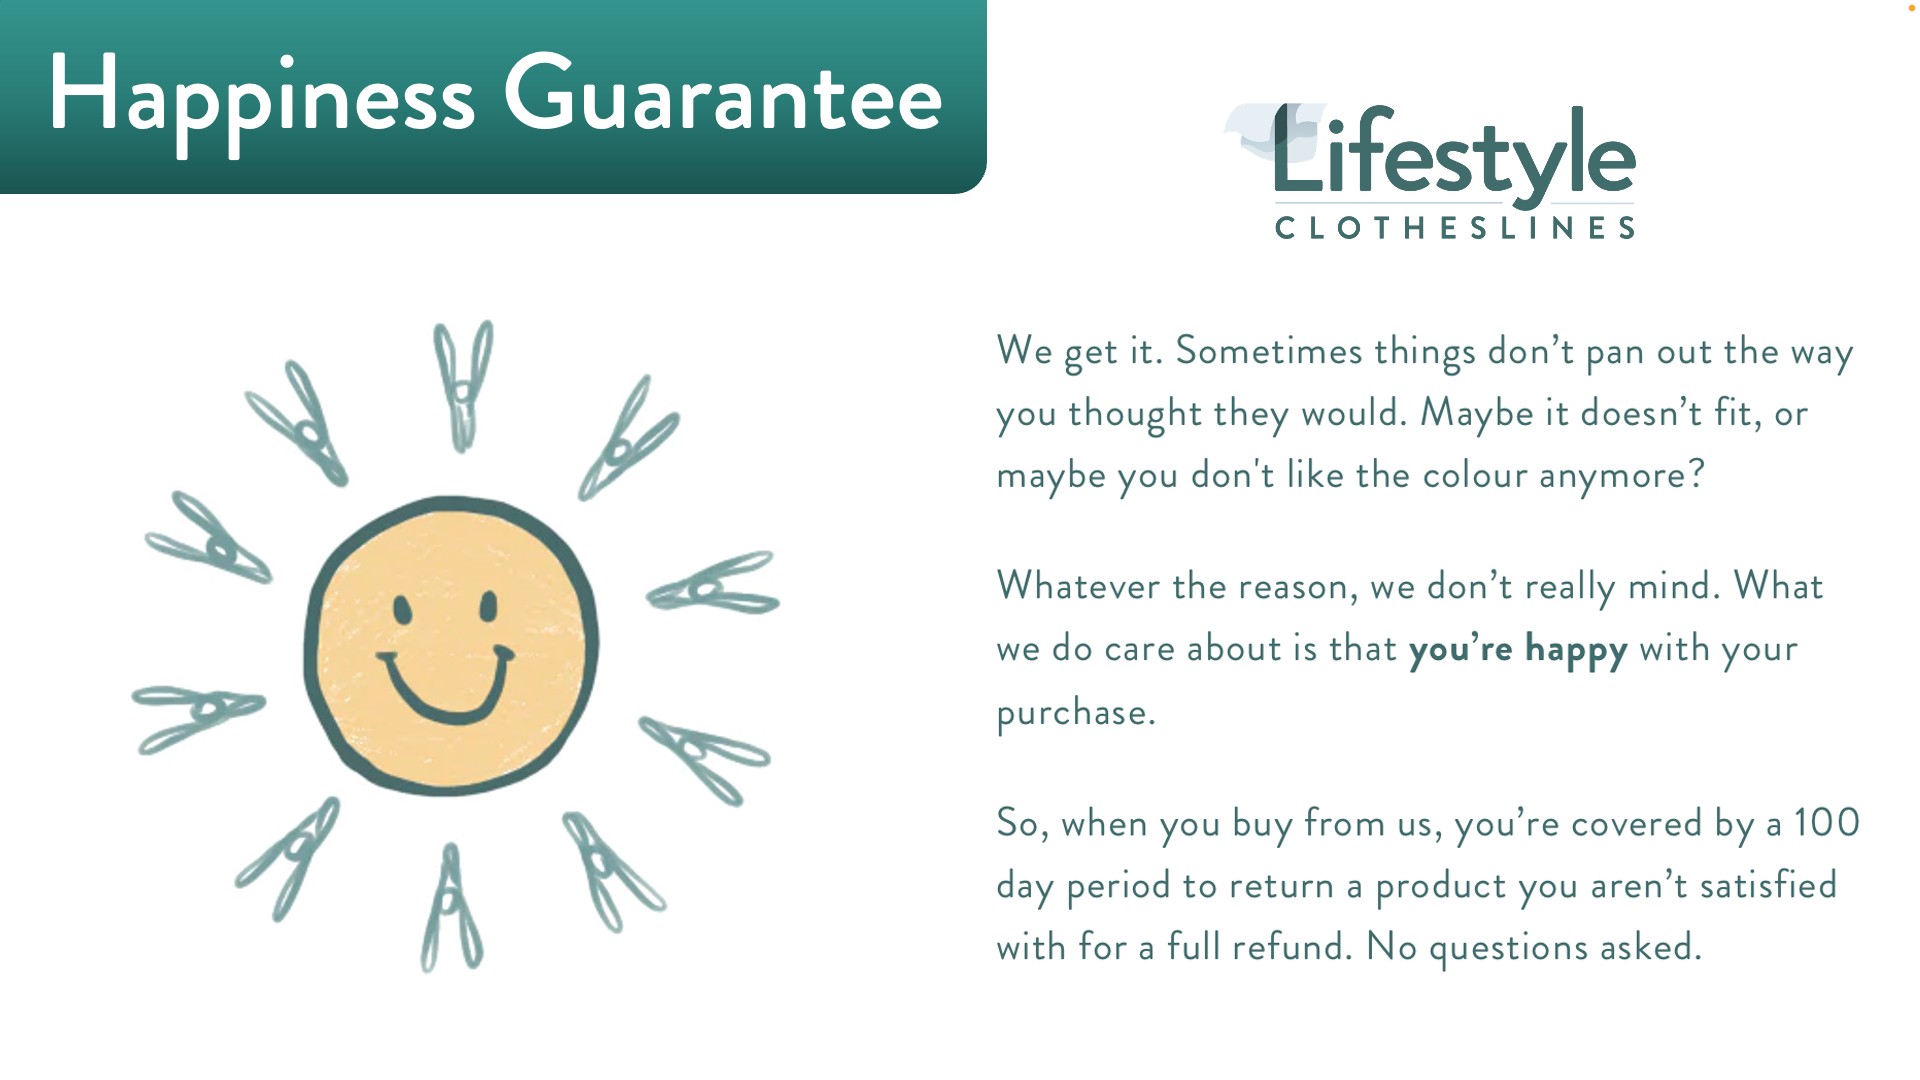 Lifestyle Clotheslines Happiness Guarantee